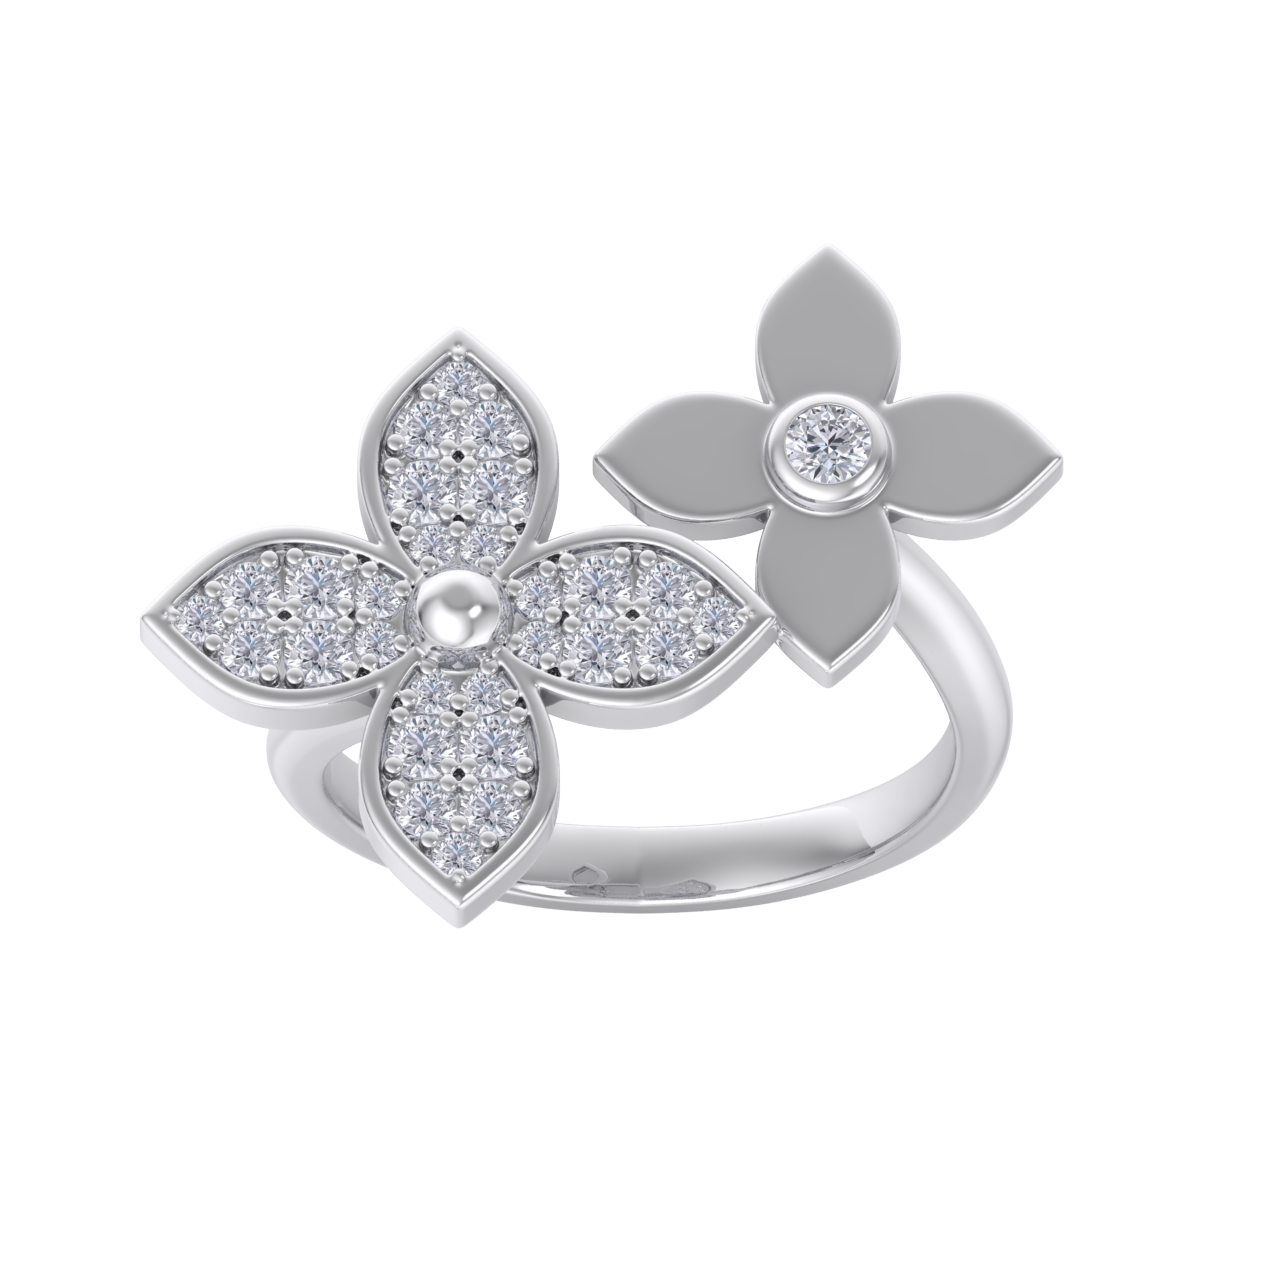 Ring with flowers in white gold with white diamonds of 0.56 ct in weight